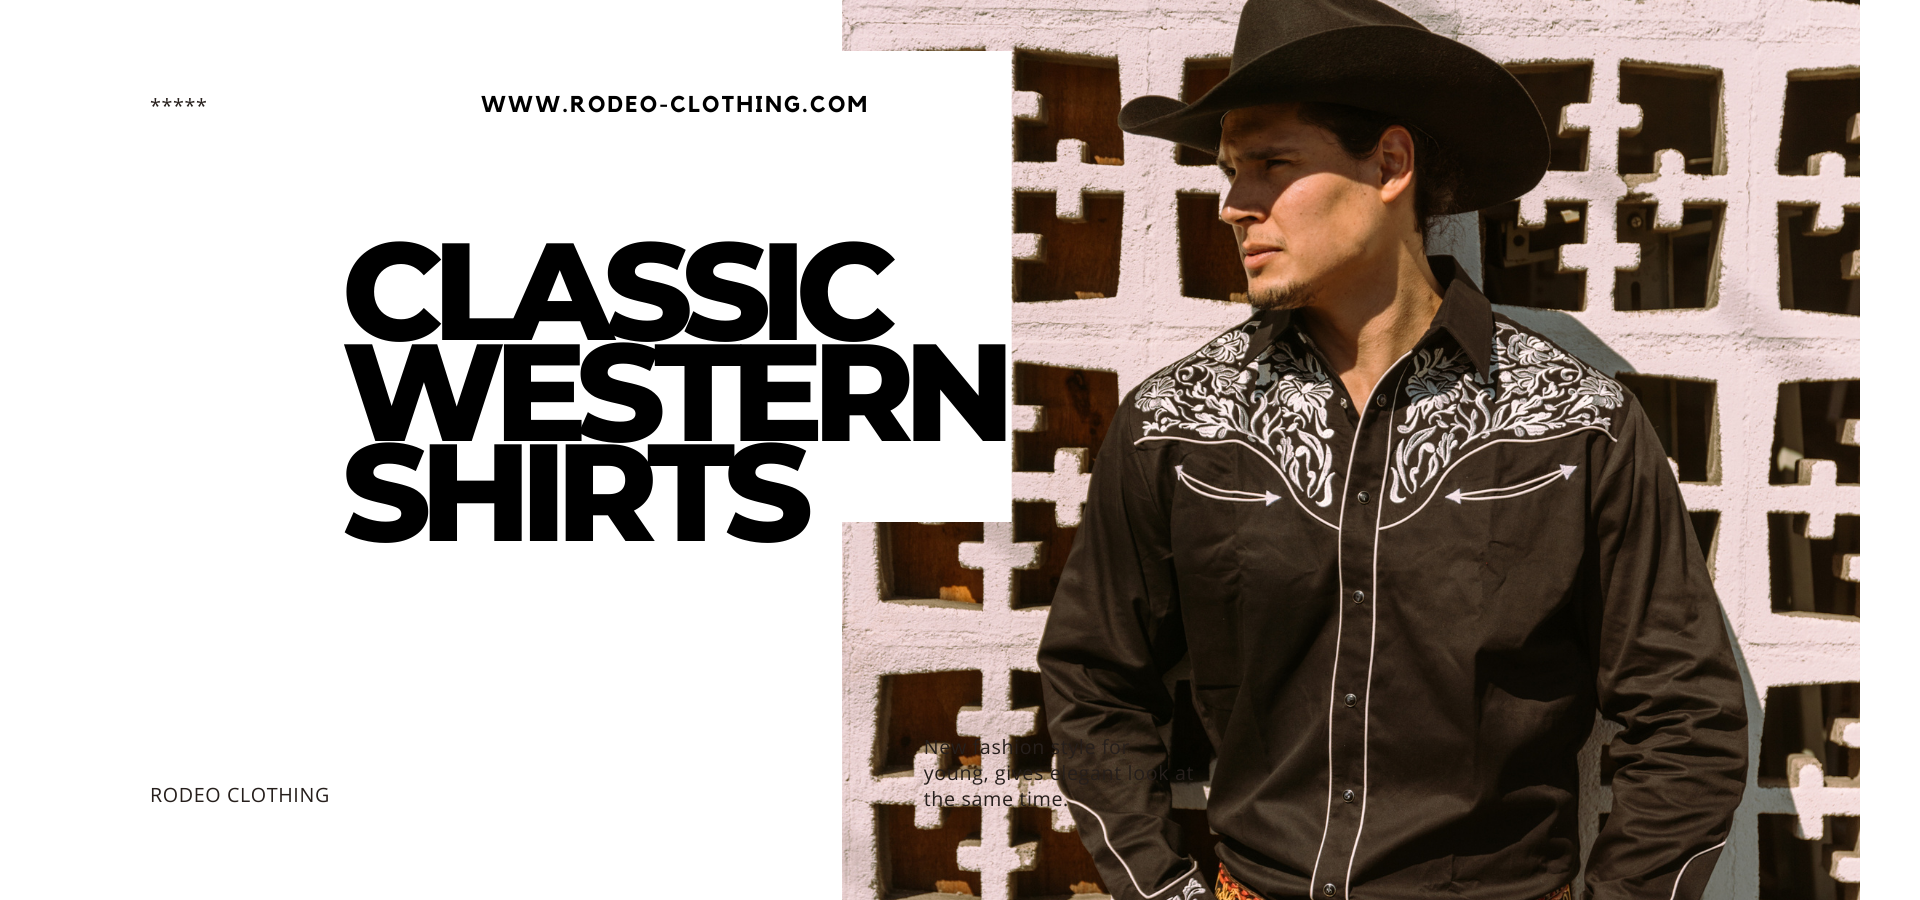 WESTERN WEAR FOR ANY OCCASION | Rodeo Clothing Retail Store | Western Apparel | RodeoClothing Store